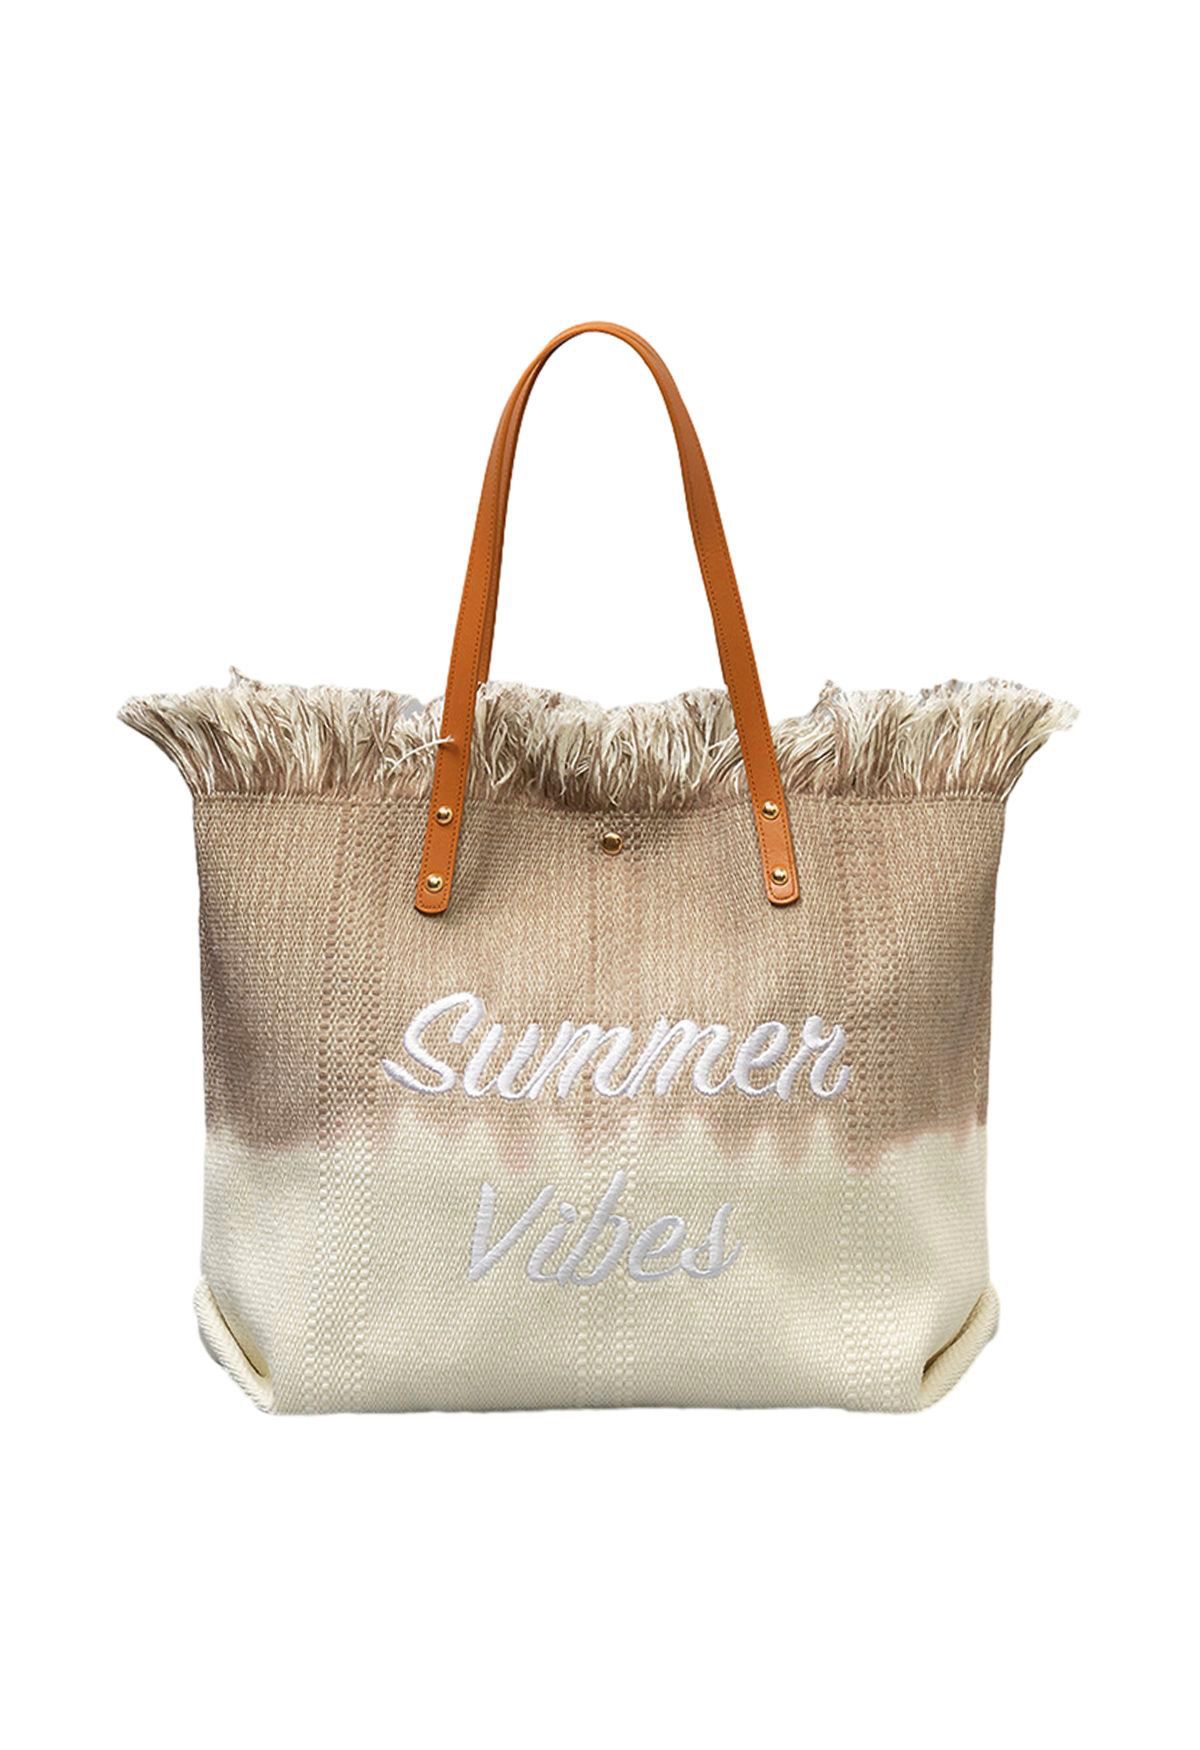 Summer Vibes Two-Tone Canvas Tote Bag in Khaki